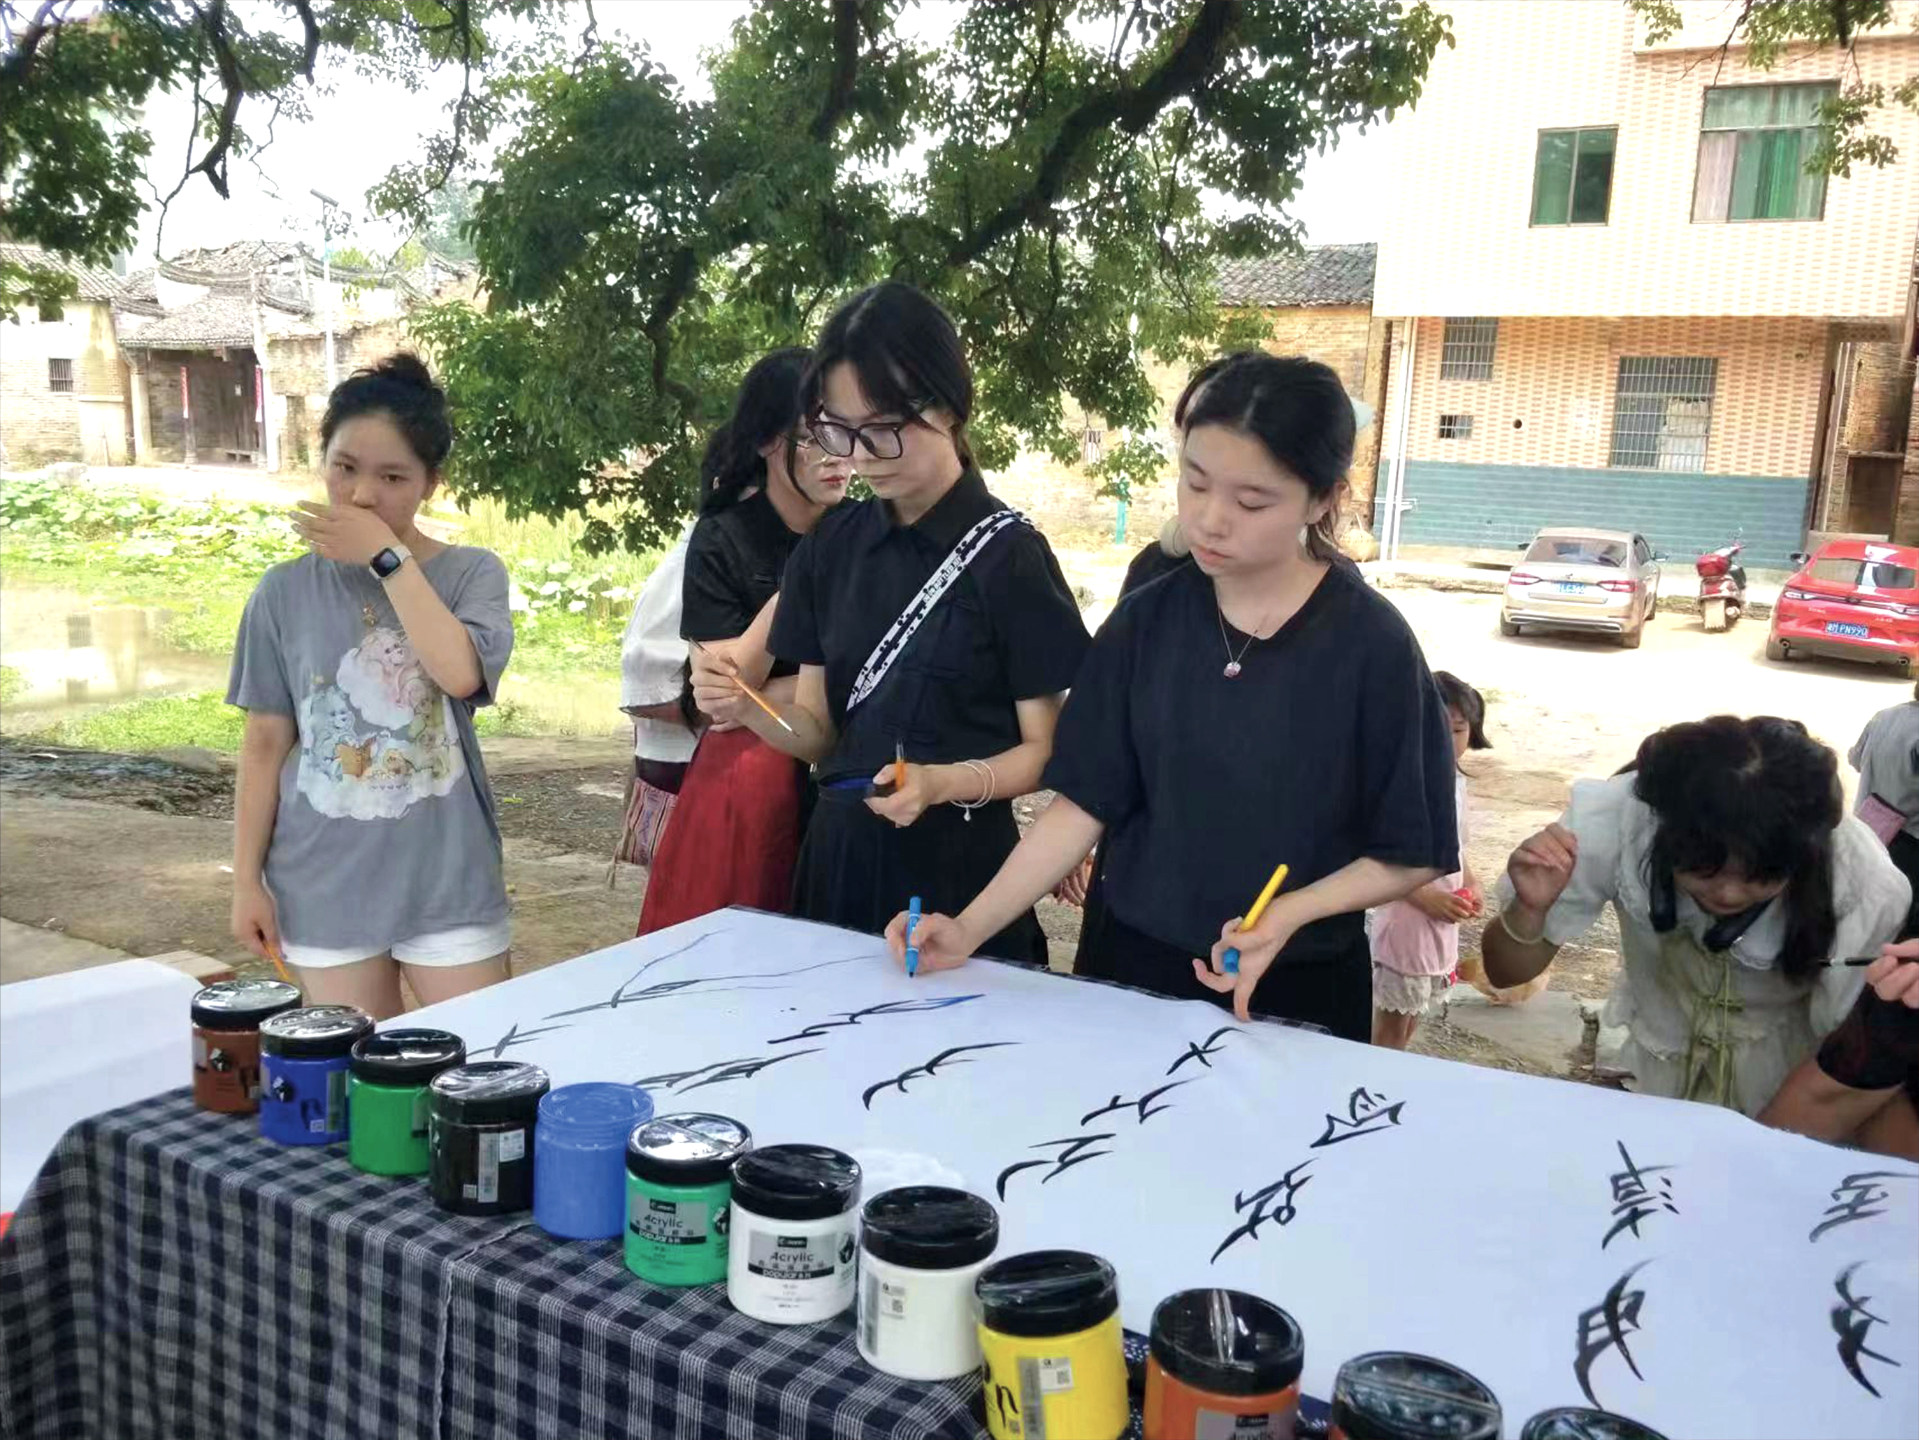 Women painting Chinese characters on long paper strip outside